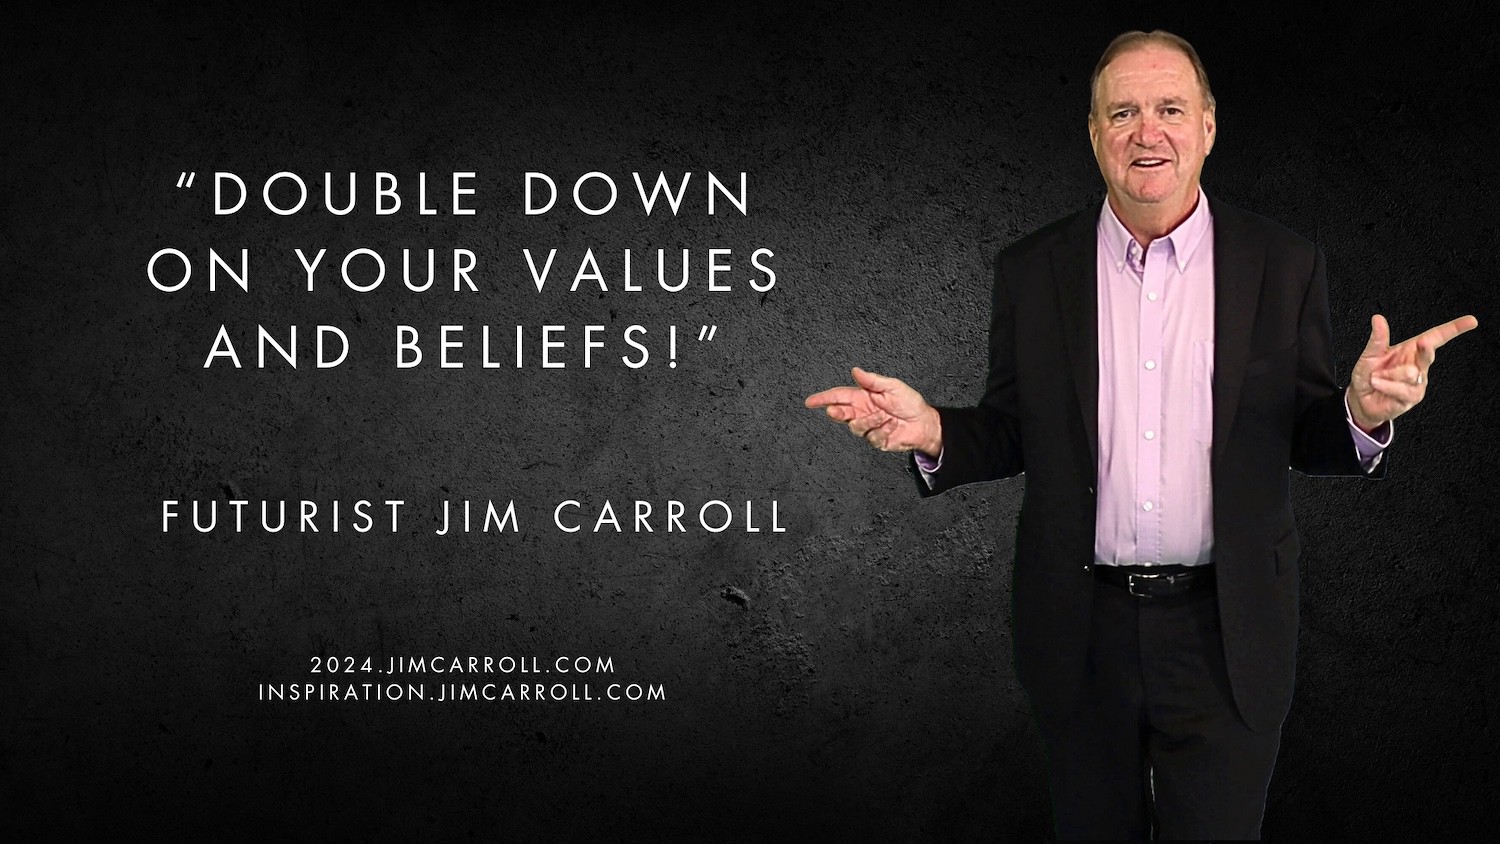 "Double down on your values and beliefs" - Futurist Jim Carroll